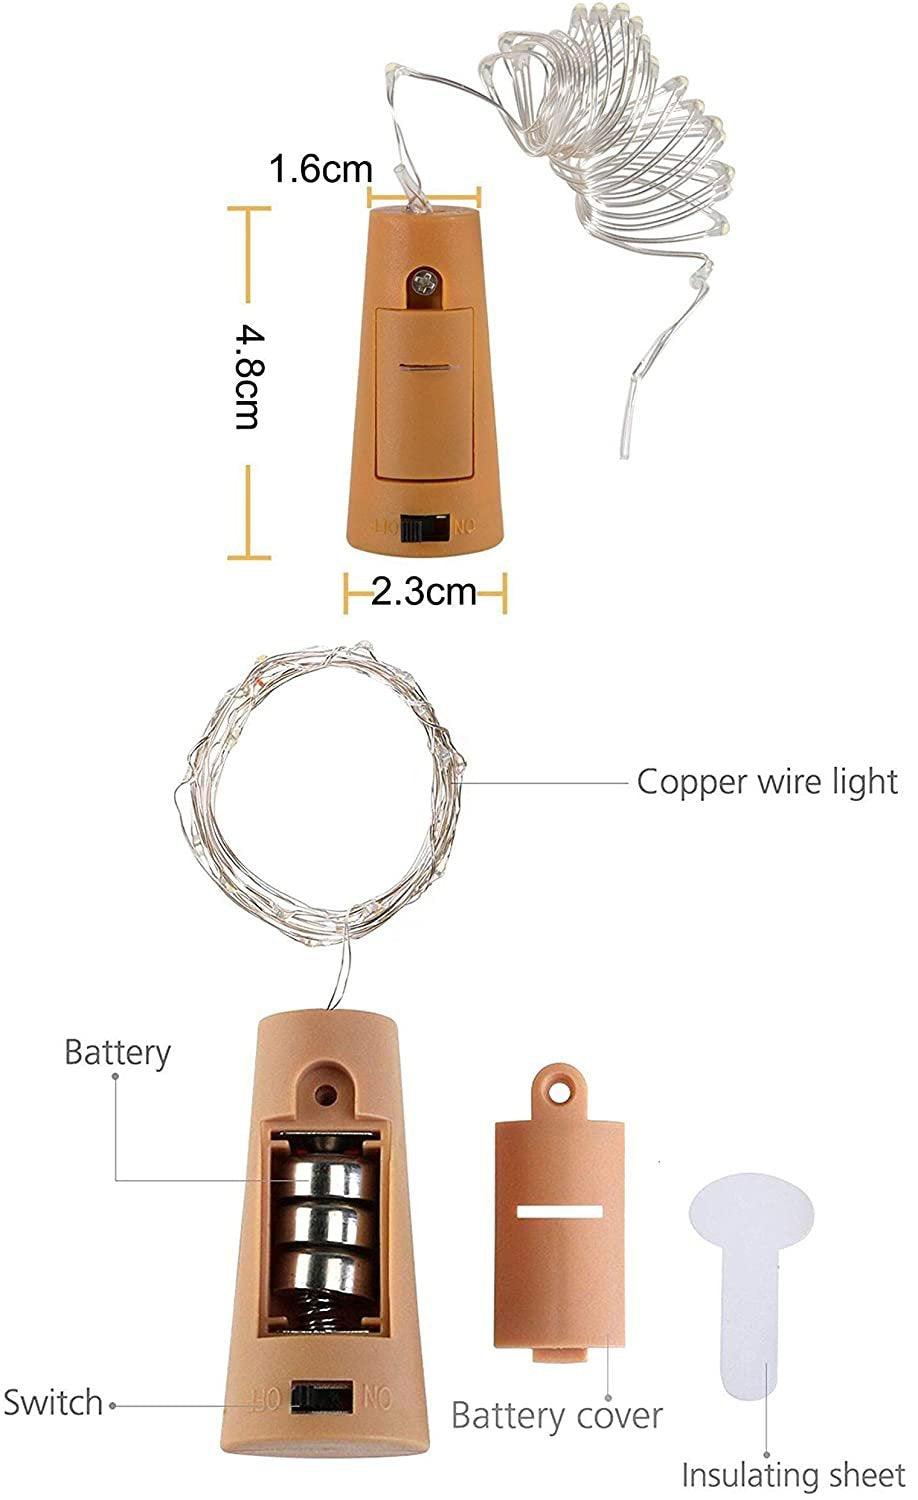 Wine Bottle Cork Lights Battery Powered Colorful Fairy Mini String Lights - Decotree.co Online Shop